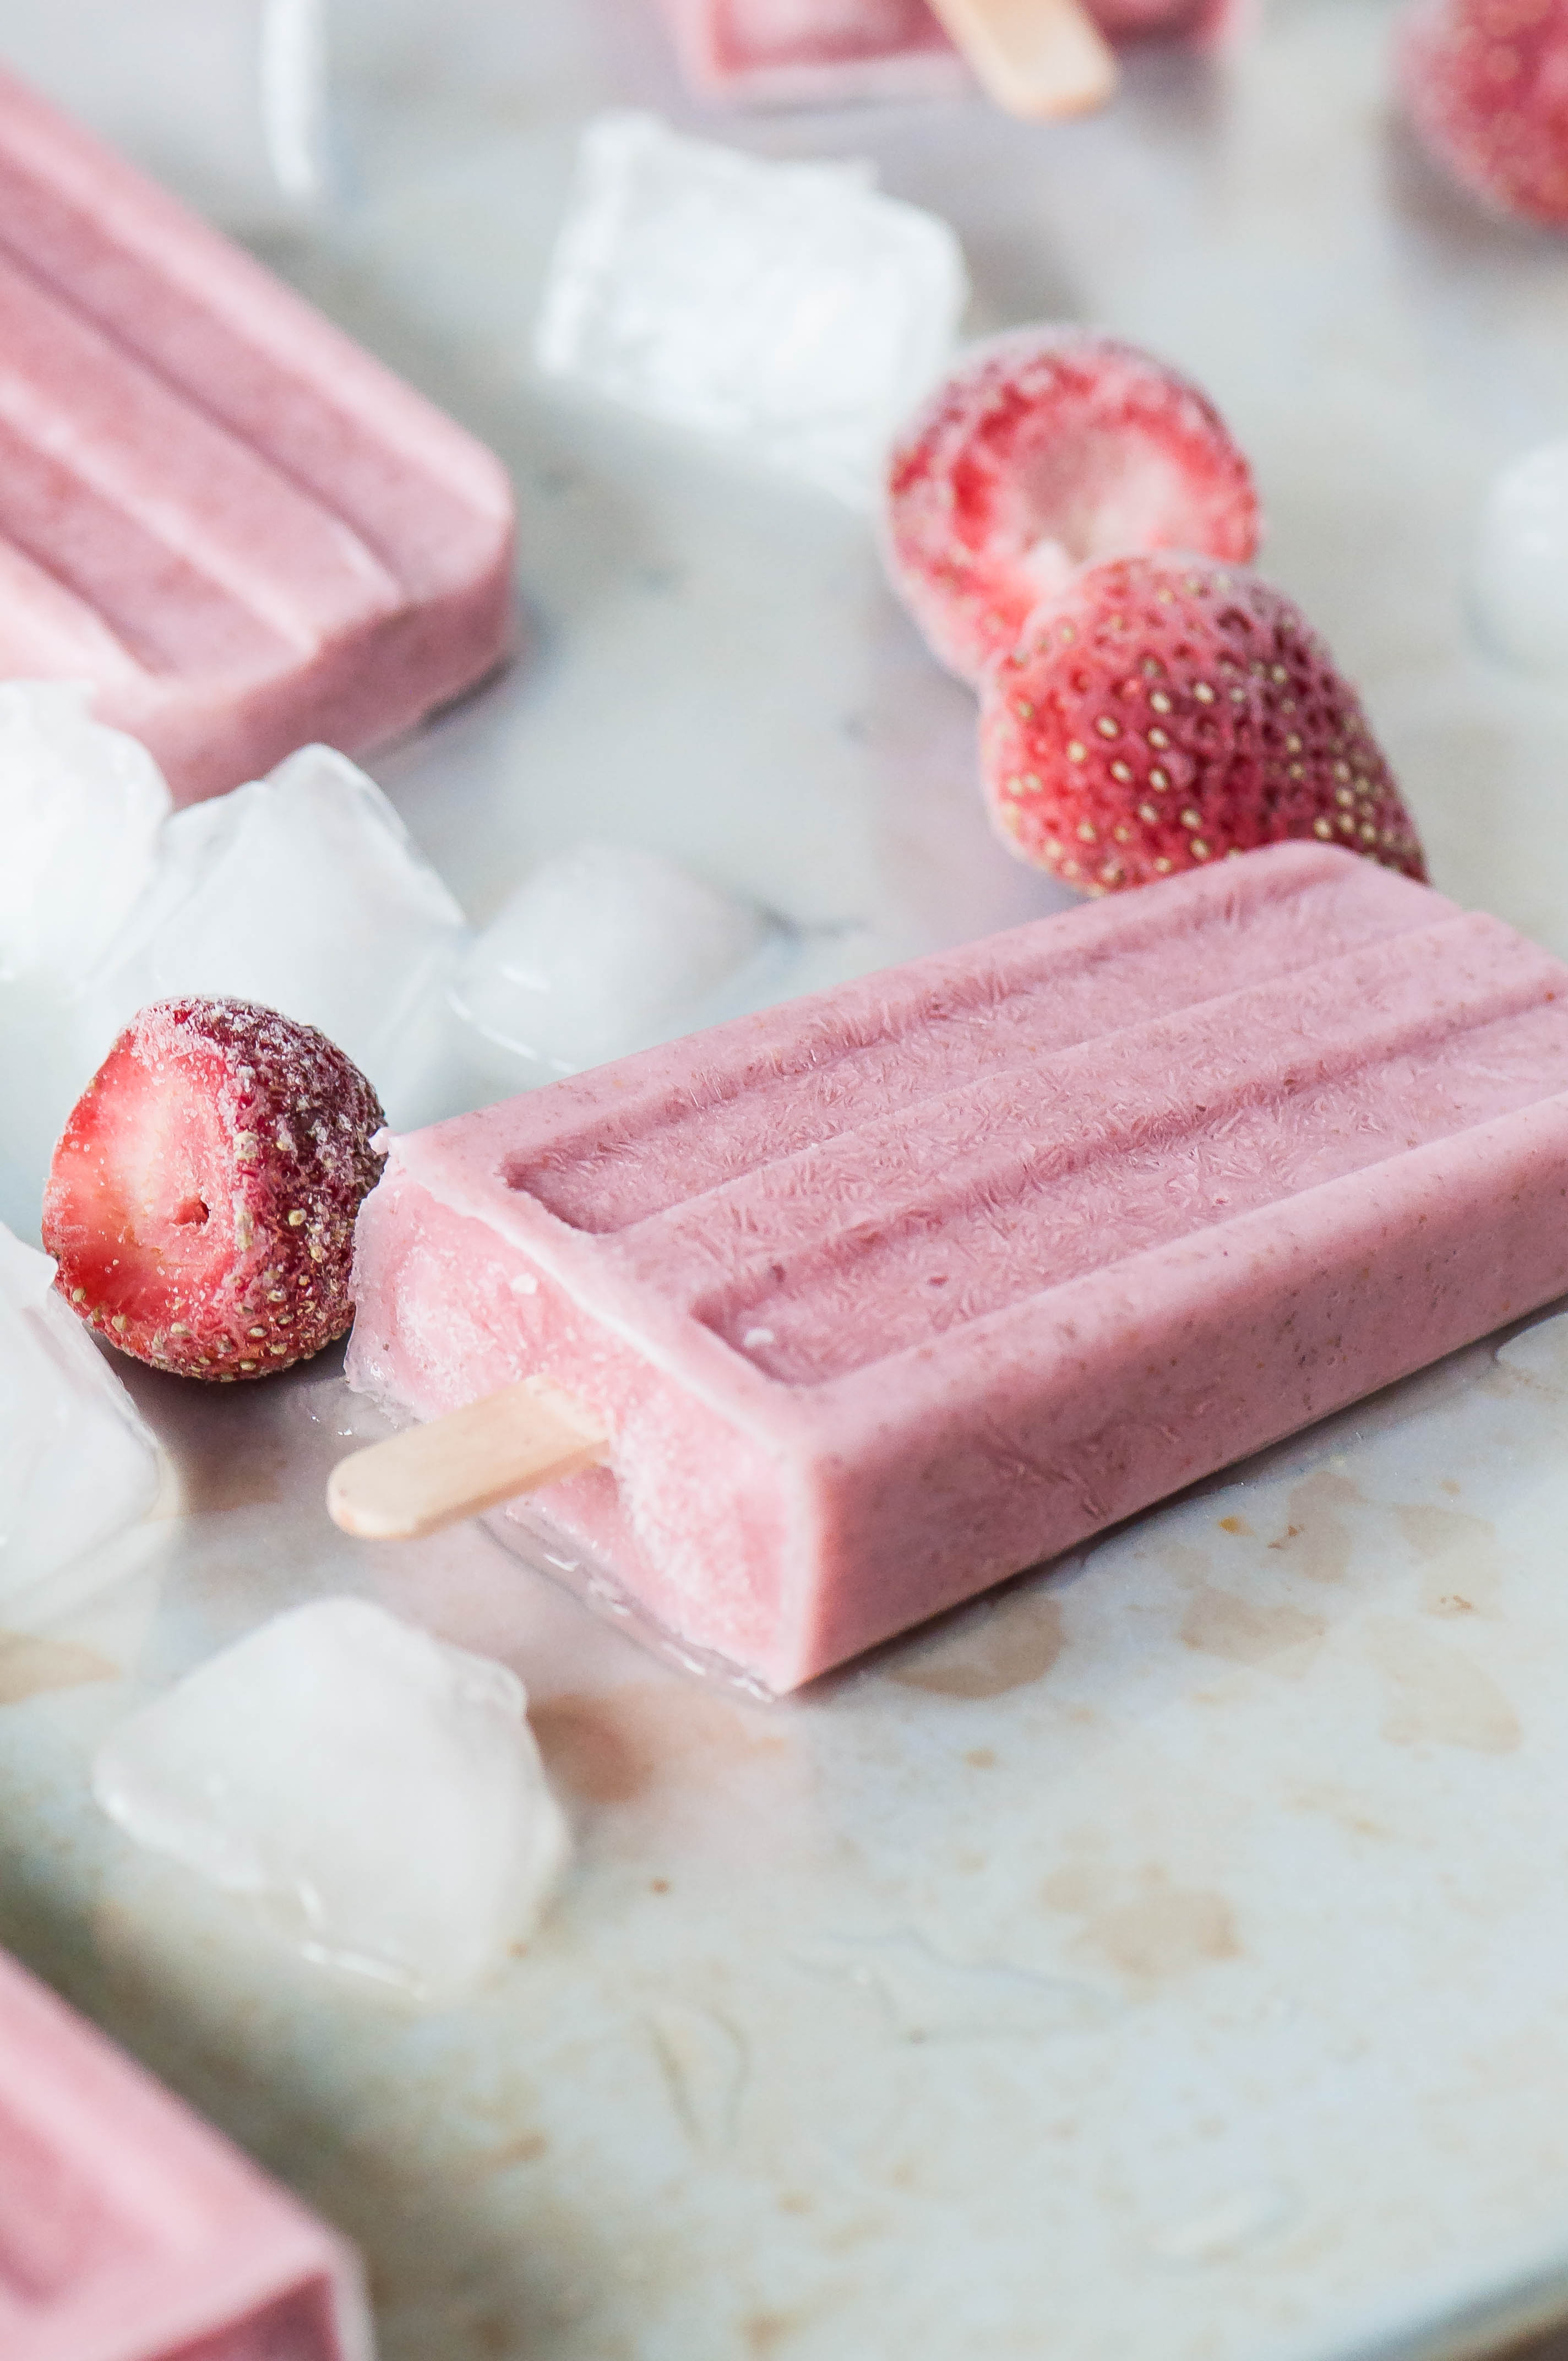 Strawberries and Cream Smoothie Pops